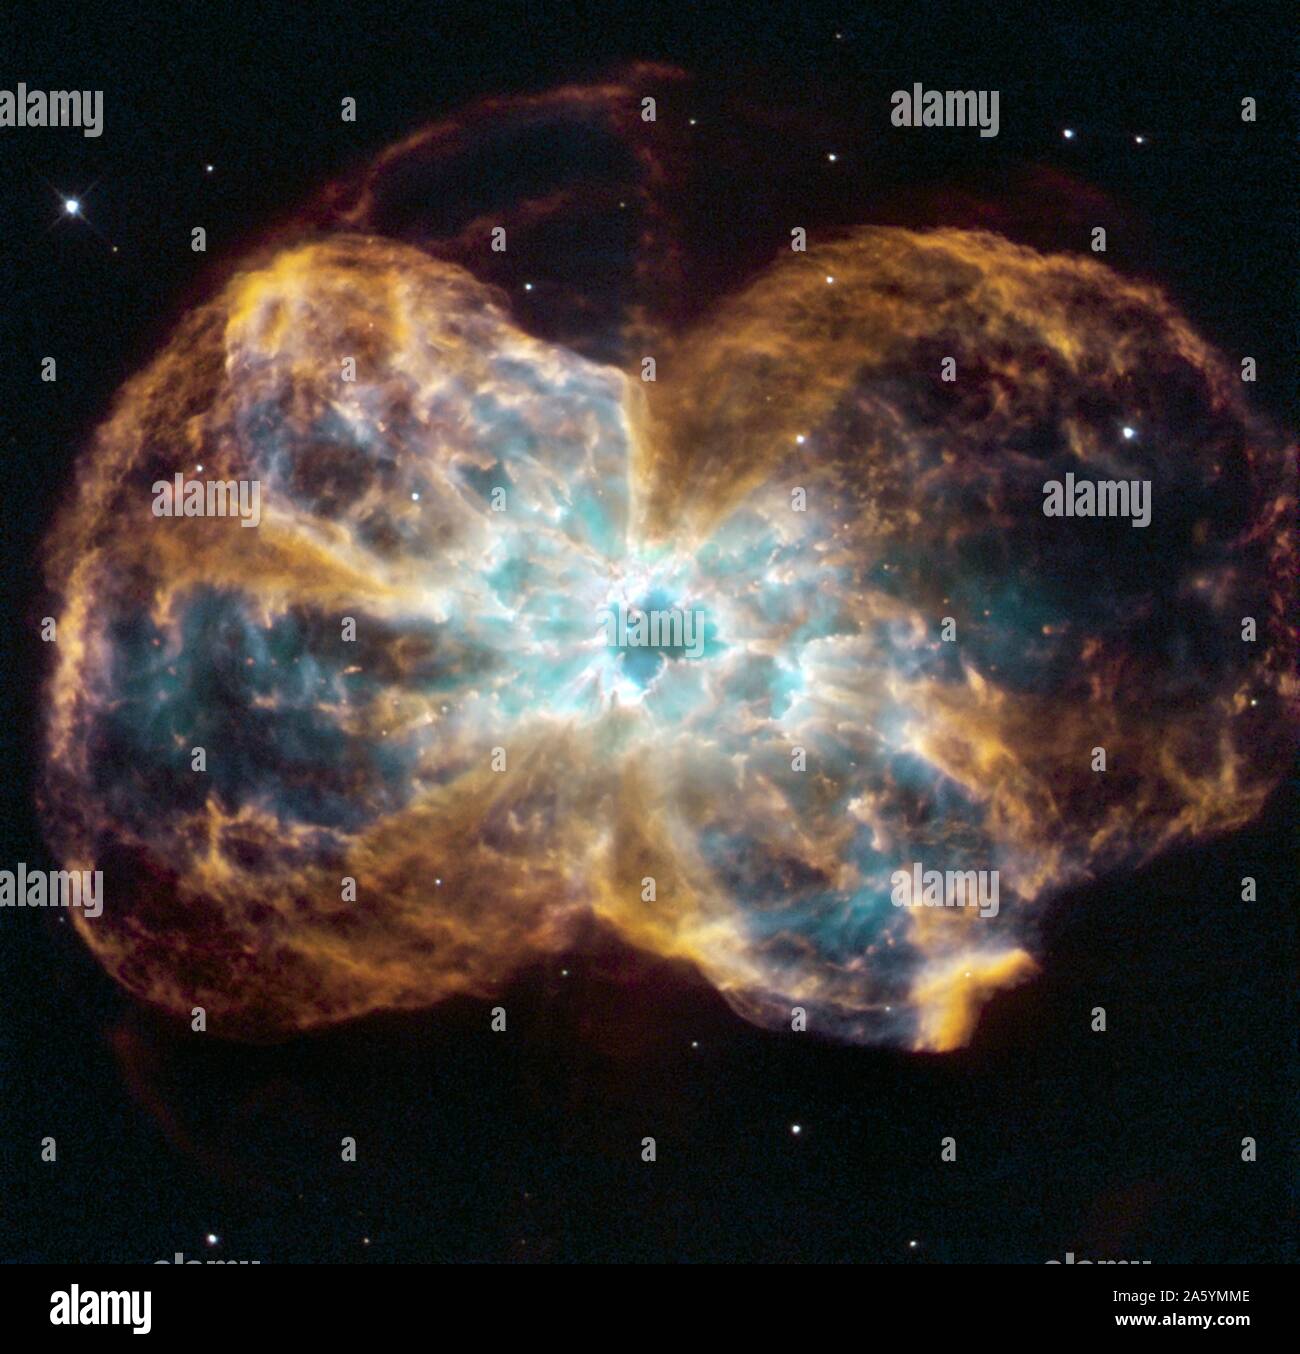 The star is ending its life by casting off its outer layers of gas, which formed a cocoon around the star's remaining core. Ultraviolet light from the dying star makes the material glow. The burned-out star, called a white dwarf, is the white dot in the center. Hubble Space Telescope (HST). Stock Photo